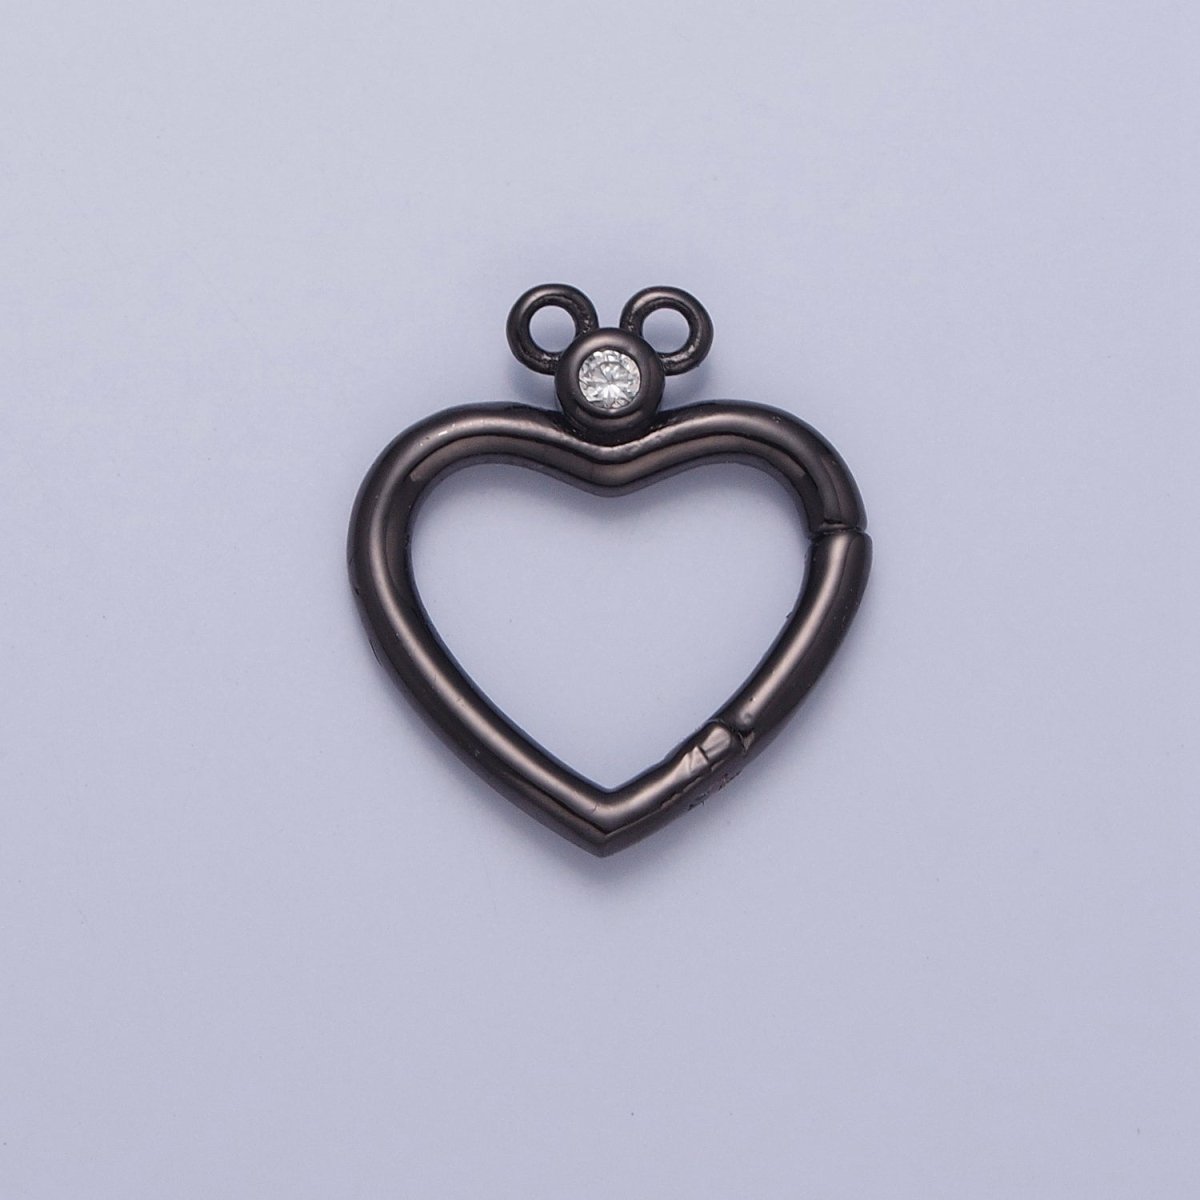 24K Gold Filled Jewelry Closure, Heart Toggle Clasps with Cubic Zirconia L-786~L-789 - DLUXCA